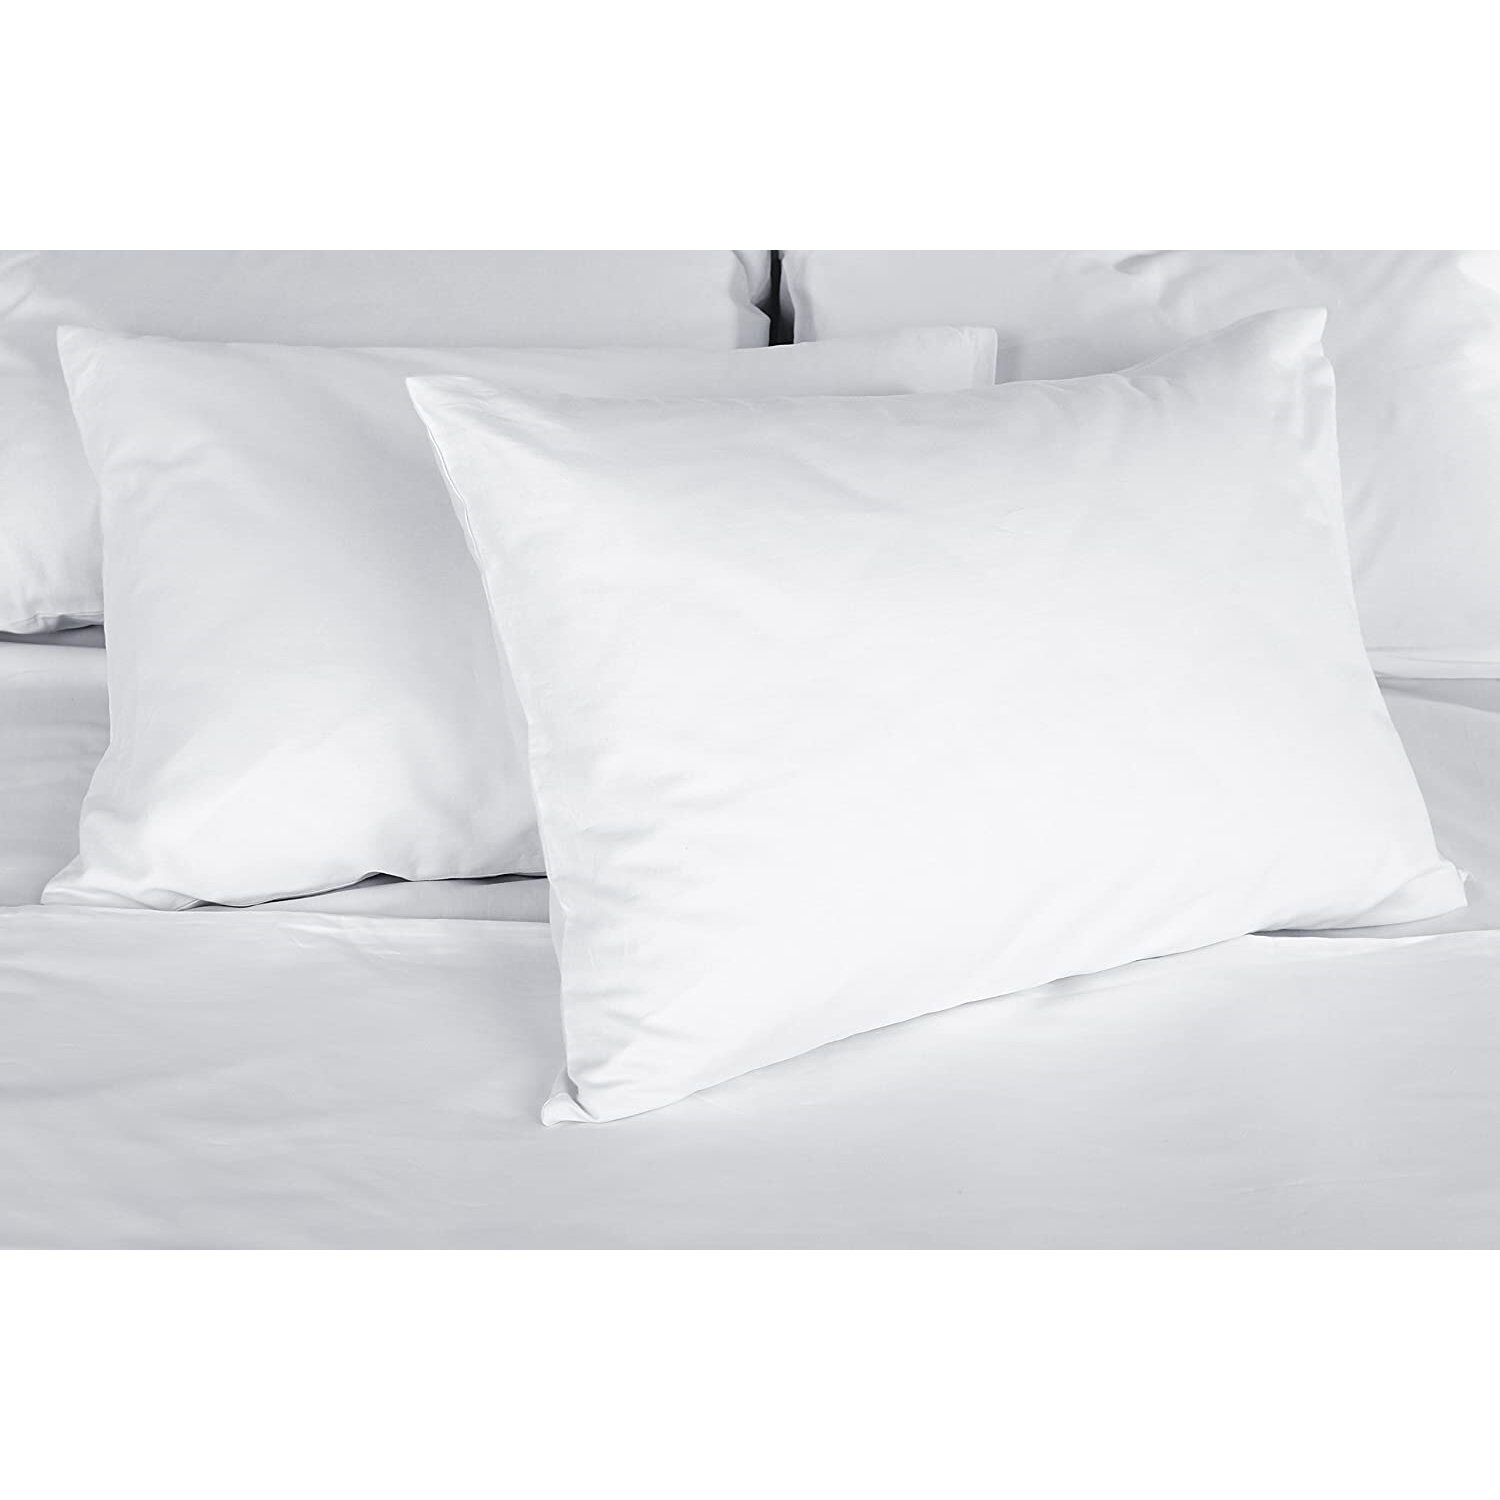 Best pillow for side sleepers, Stomach and Side Sleep Position Guide -  Pacific Coast Bedding